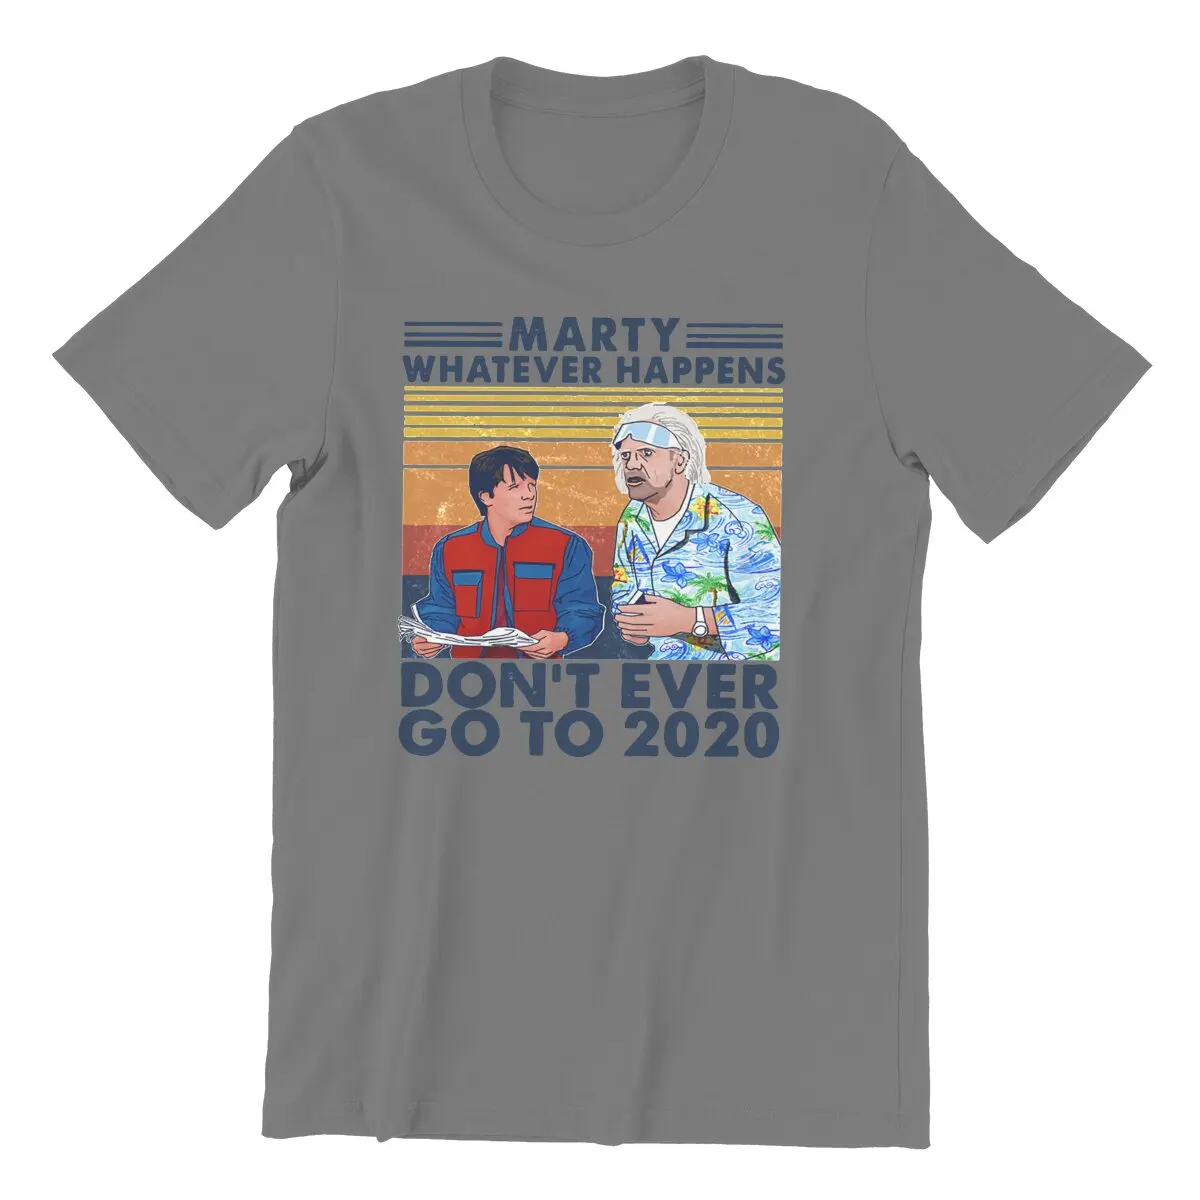 

Marty Back To Future Funny Men's T Shirt whatever happens don't ever go to 2020 Tees Short Sleeve T-Shirt Cotton Gift Clothes